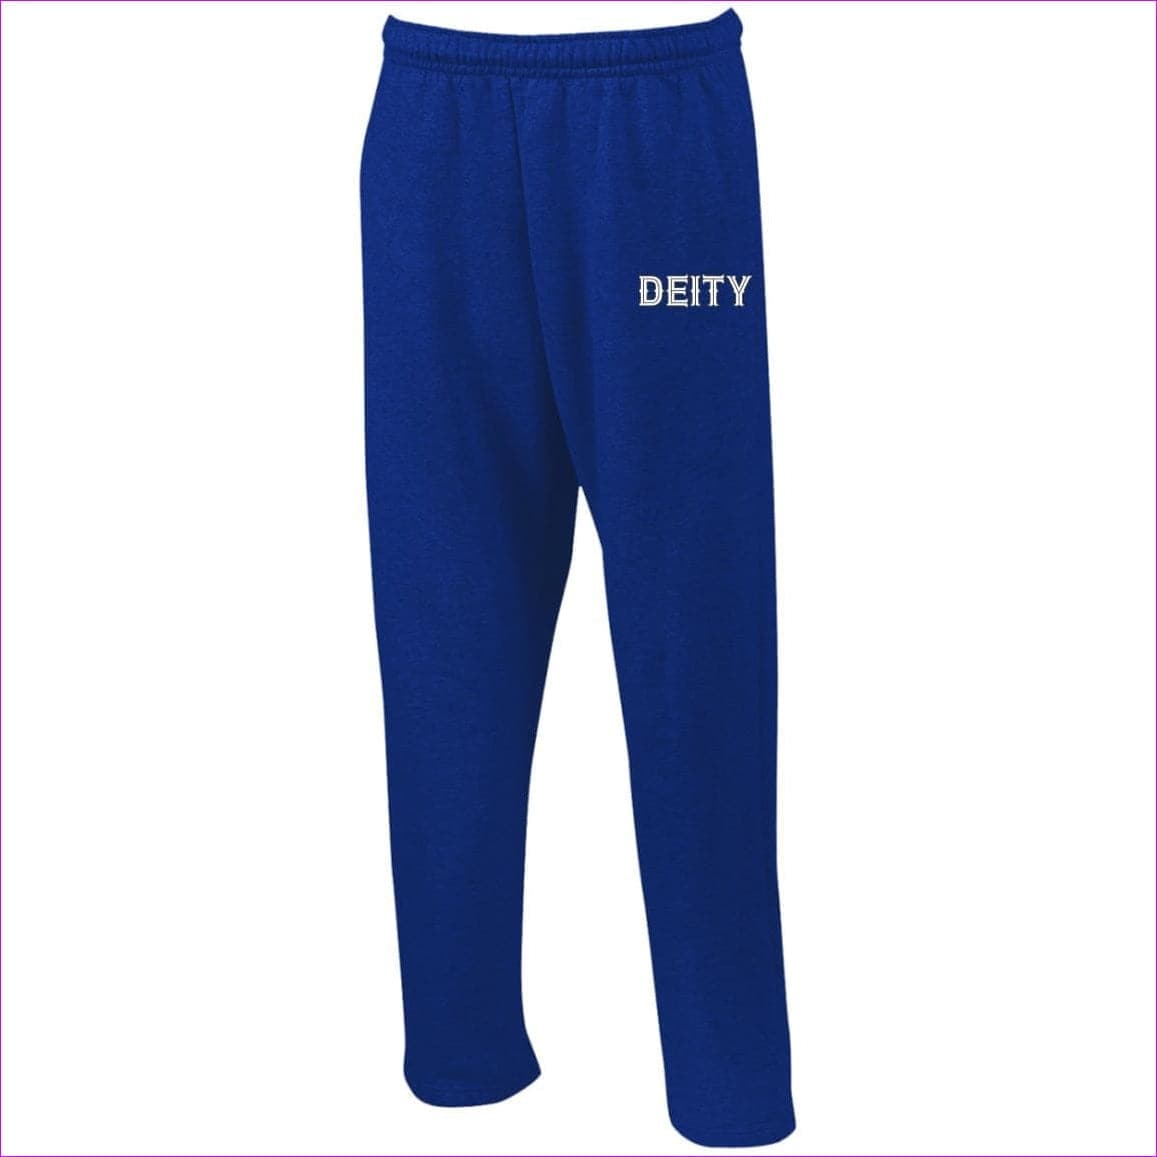 Royal Deity Open Bottom Sweatpants with Pockets - unisex sweatpants at TFC&H Co.